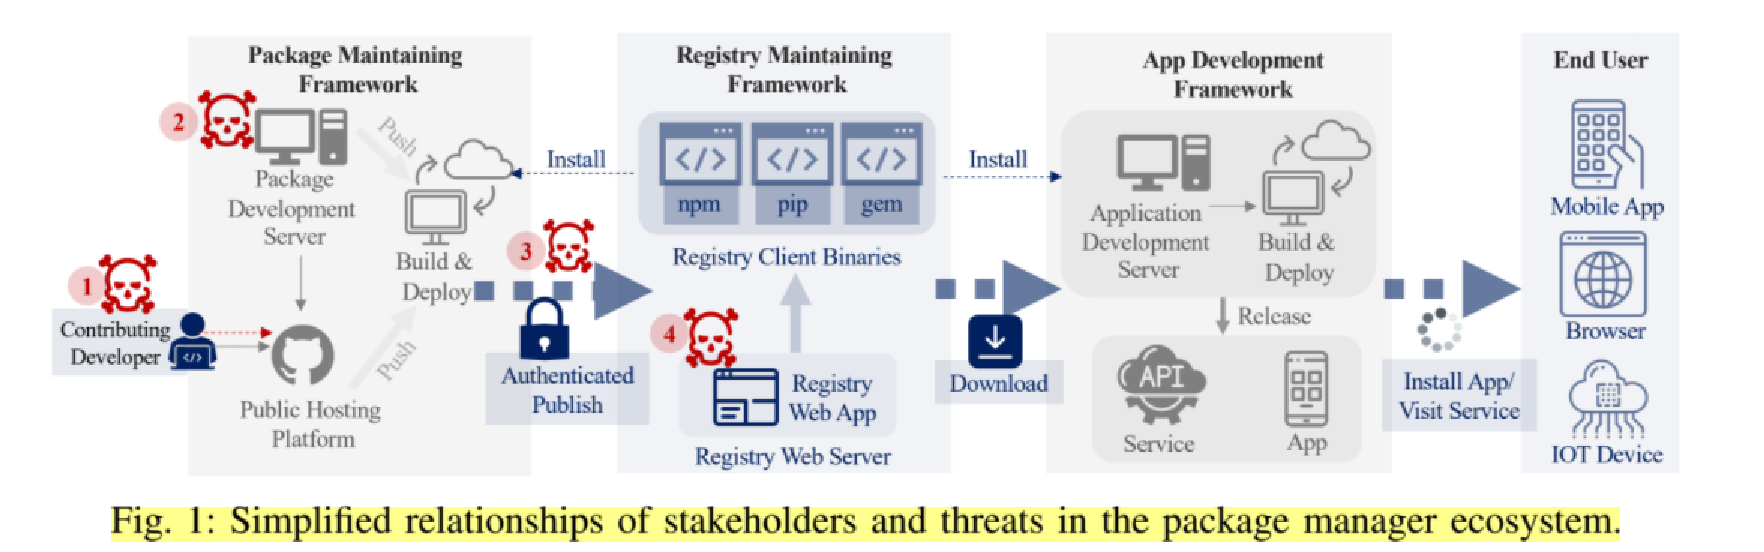 Simplified relationships of stakeholders and threats in the package manager ecosystem